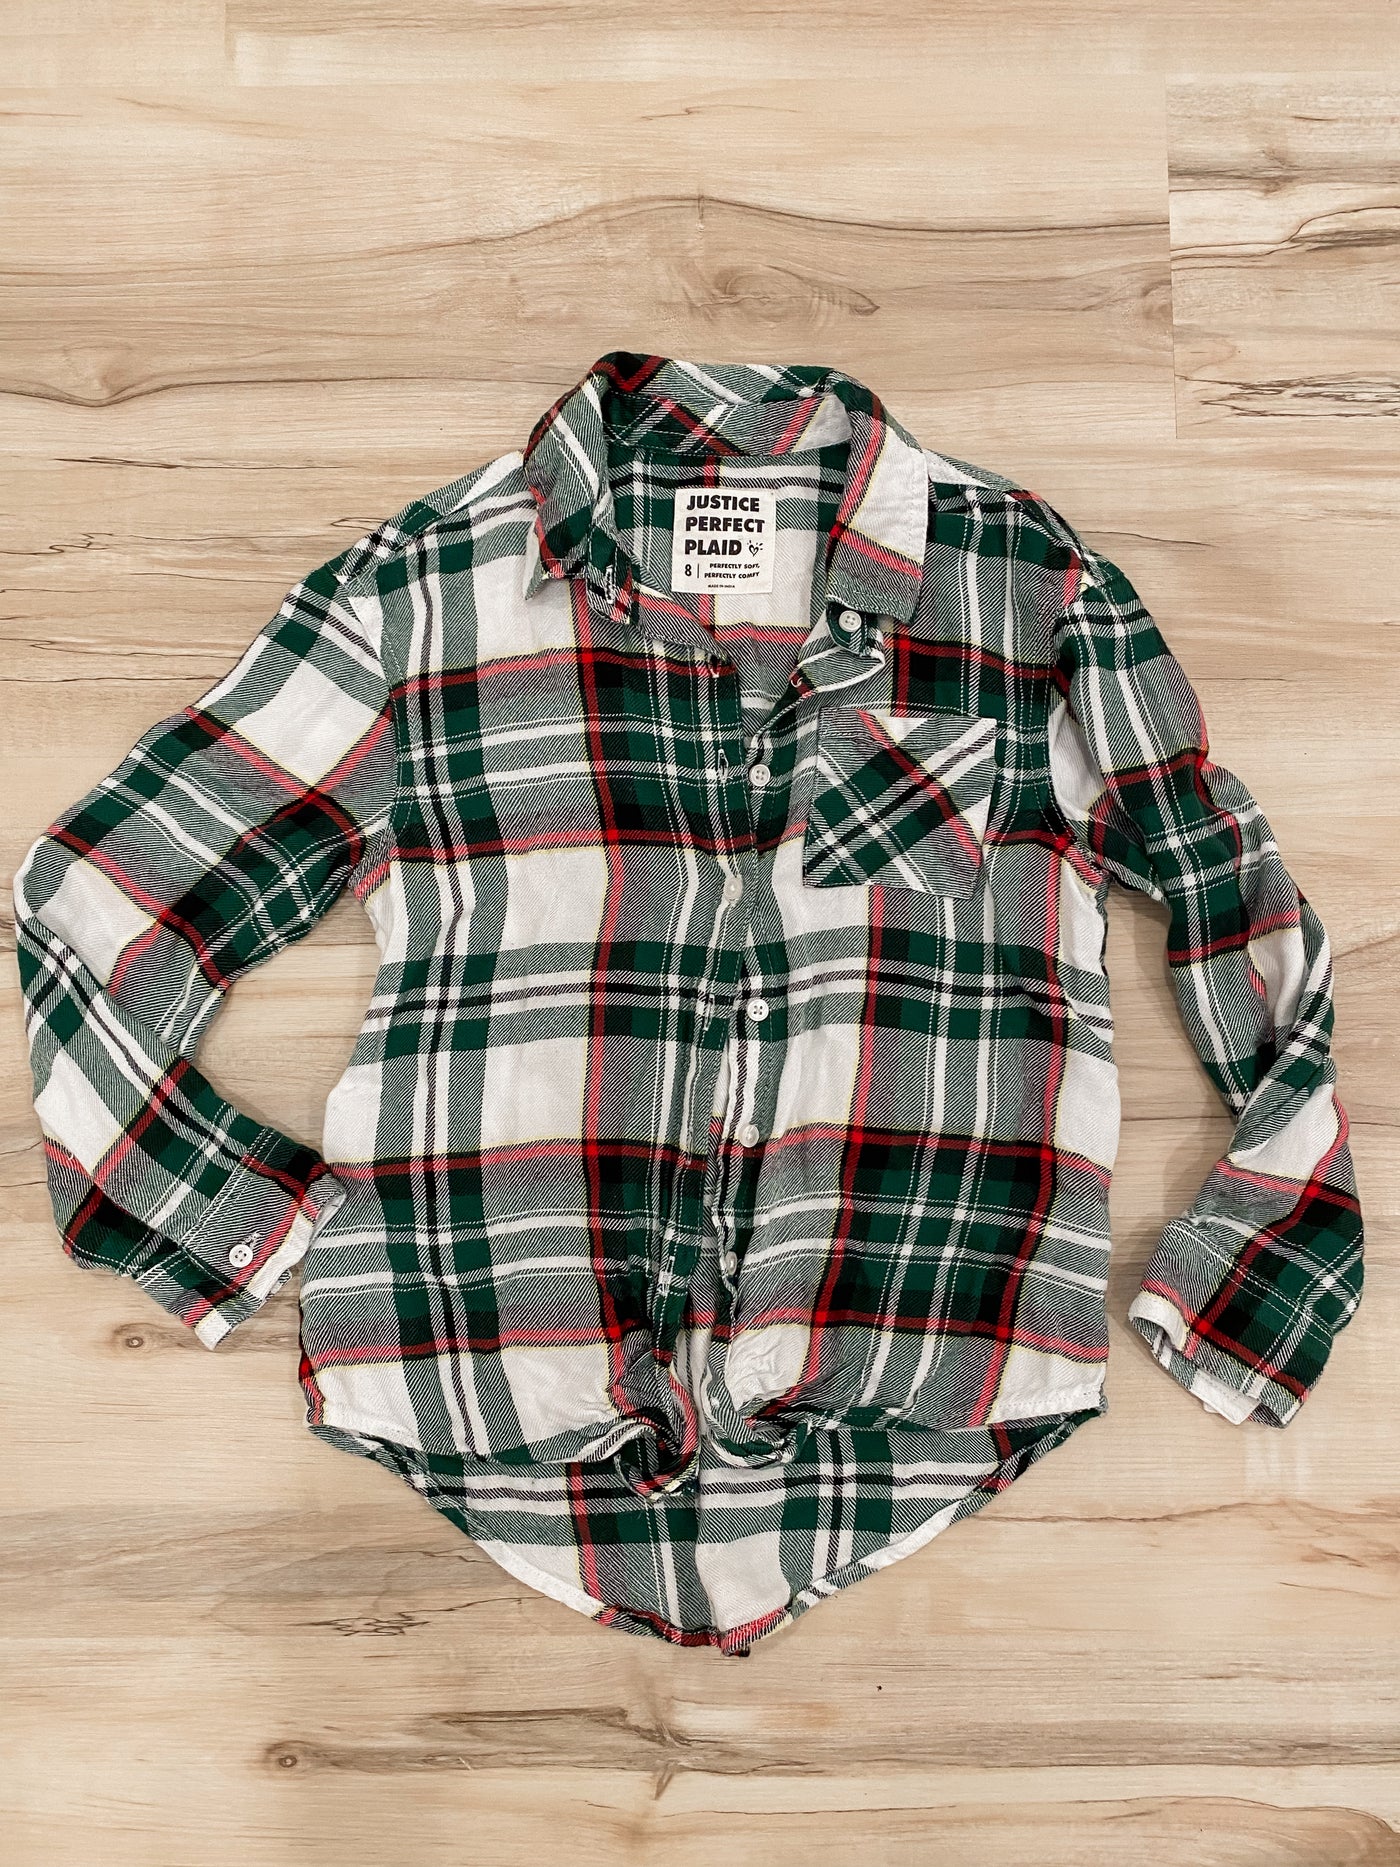 Justice holiday plaid top